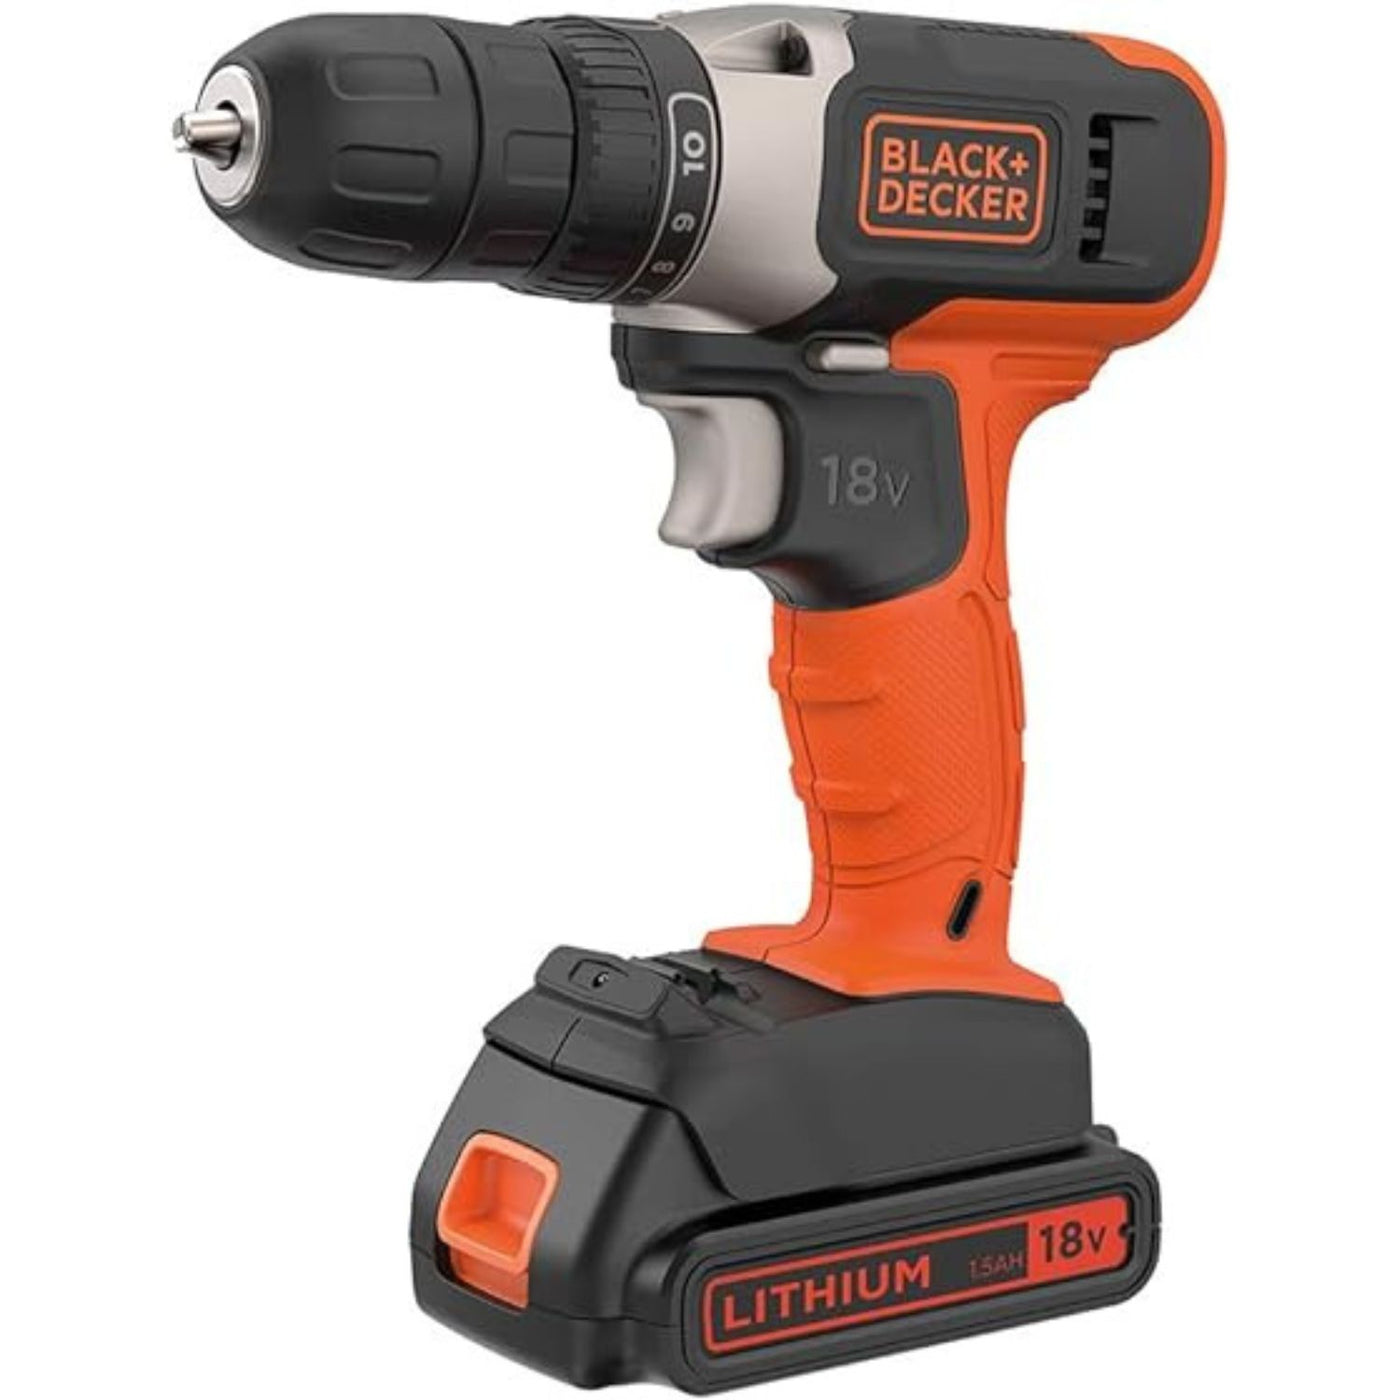 Cordless Drill Driver With 2 Batteries (1.5Ah Li-Ion) And Charger In Kit box 18V